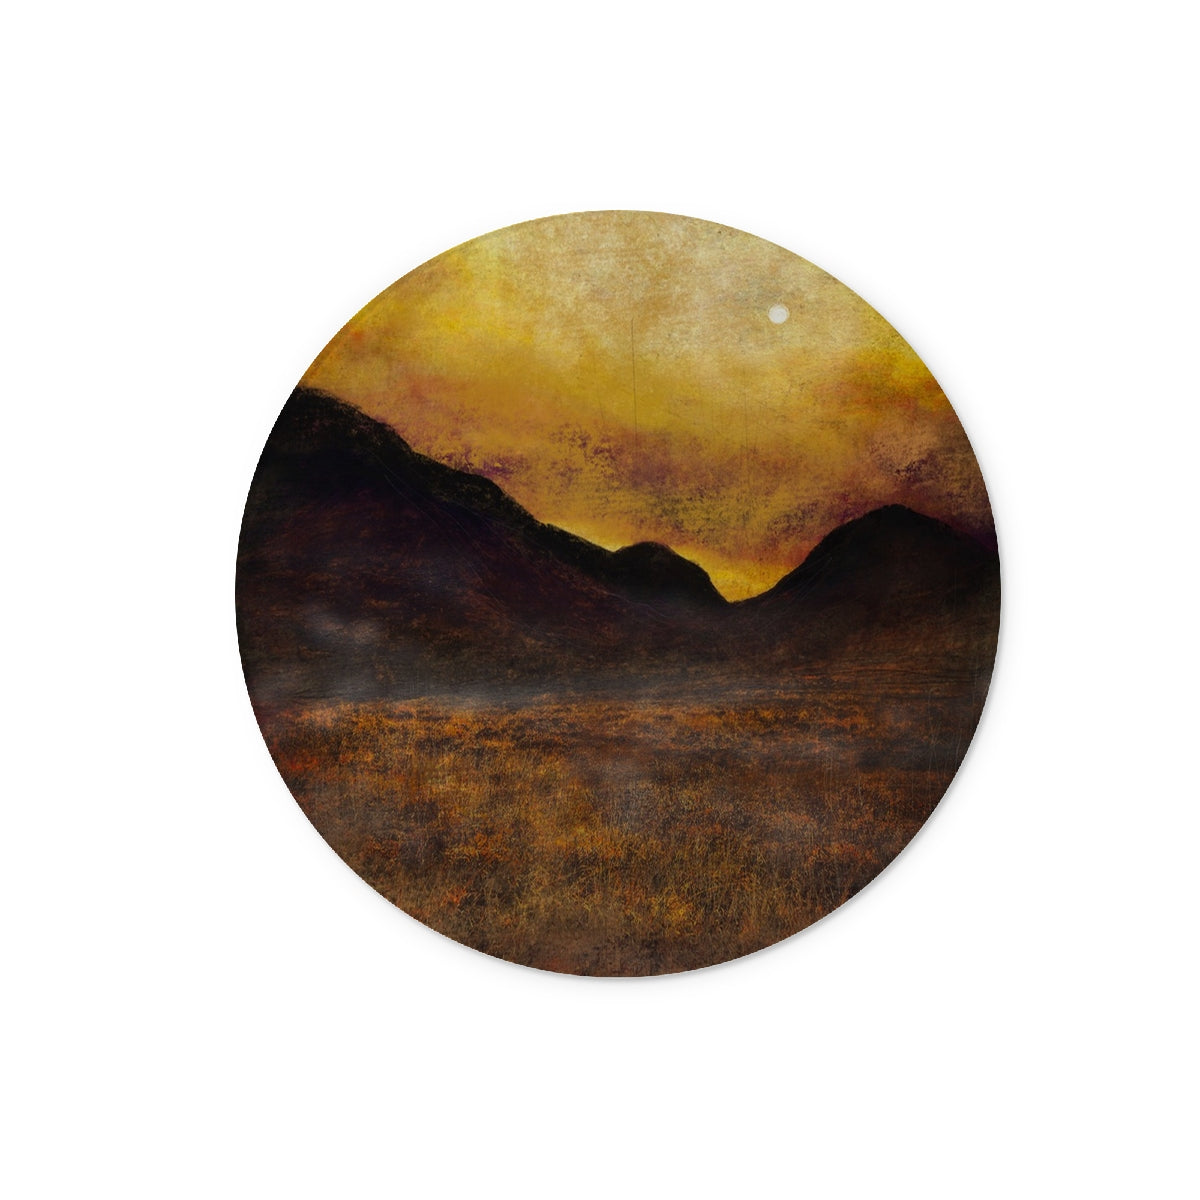 Glencoe Moonlight Art Gifts Glass Chopping Board-Glass Chopping Boards-Glencoe Art Gallery-12" Round-Paintings, Prints, Homeware, Art Gifts From Scotland By Scottish Artist Kevin Hunter